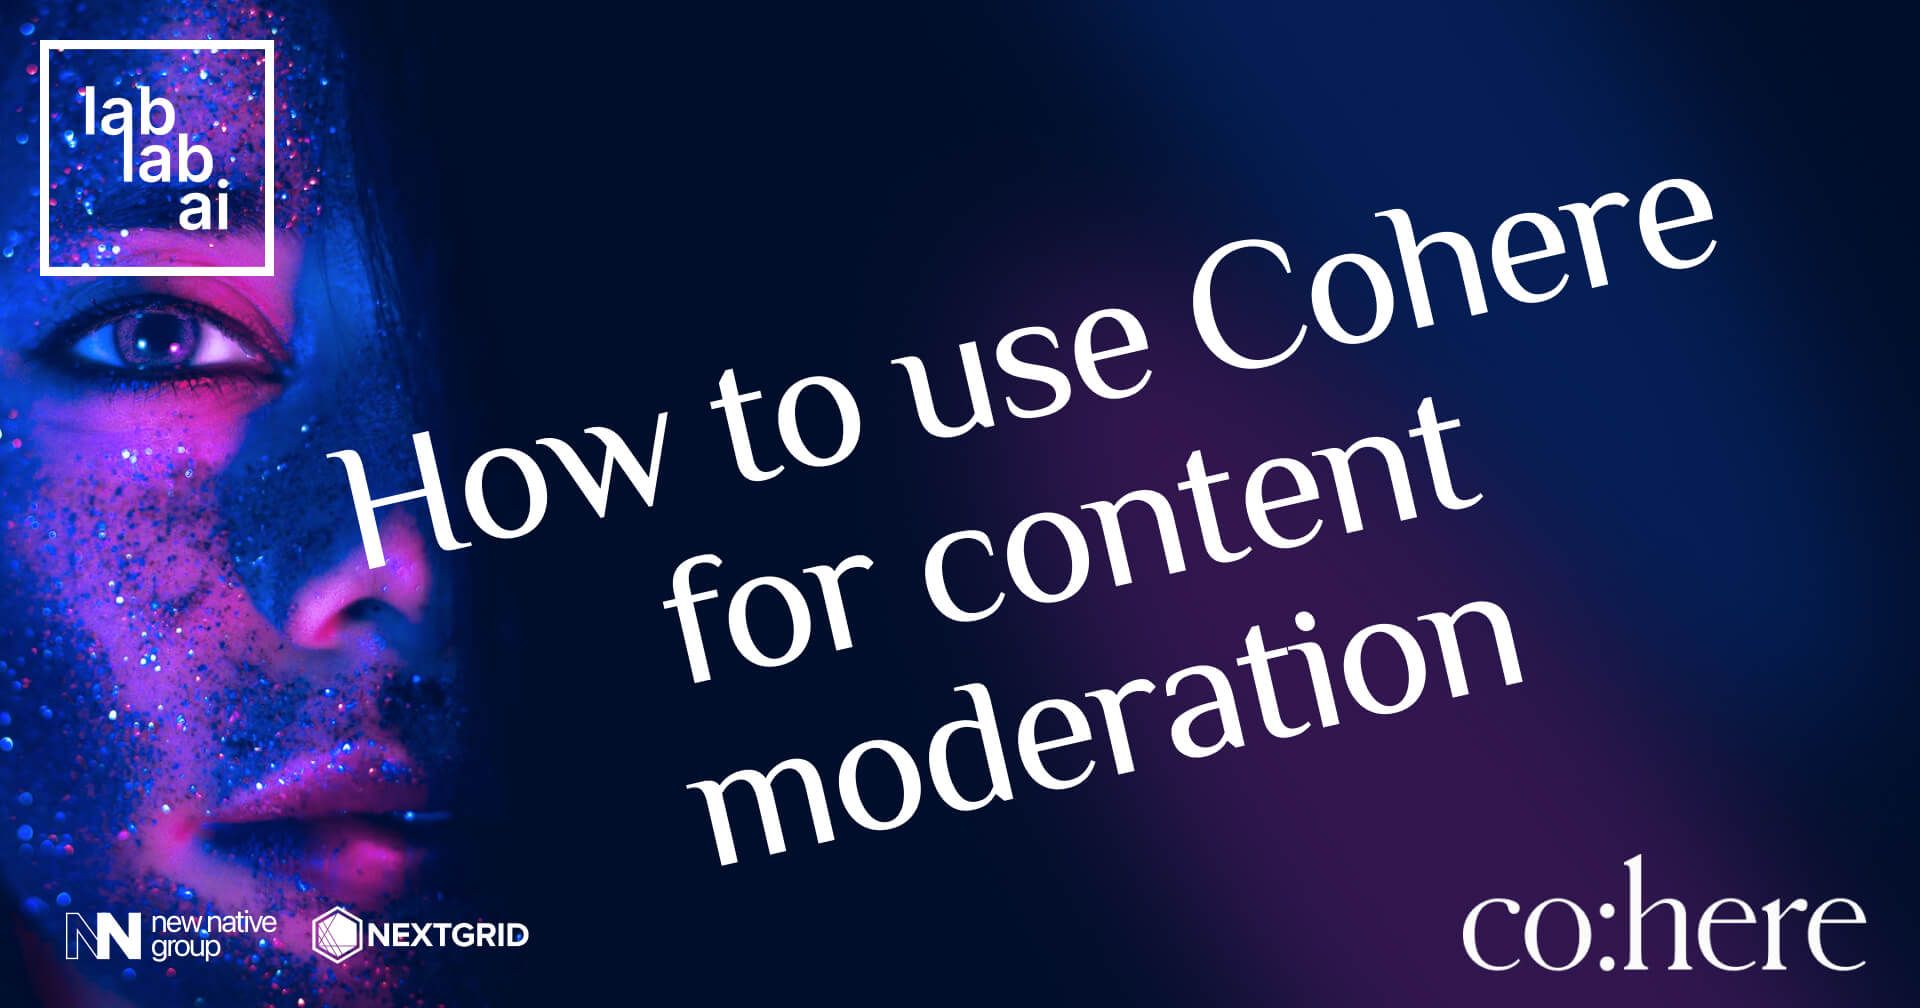 Cohere tutorial: How to use Cohere for content moderation